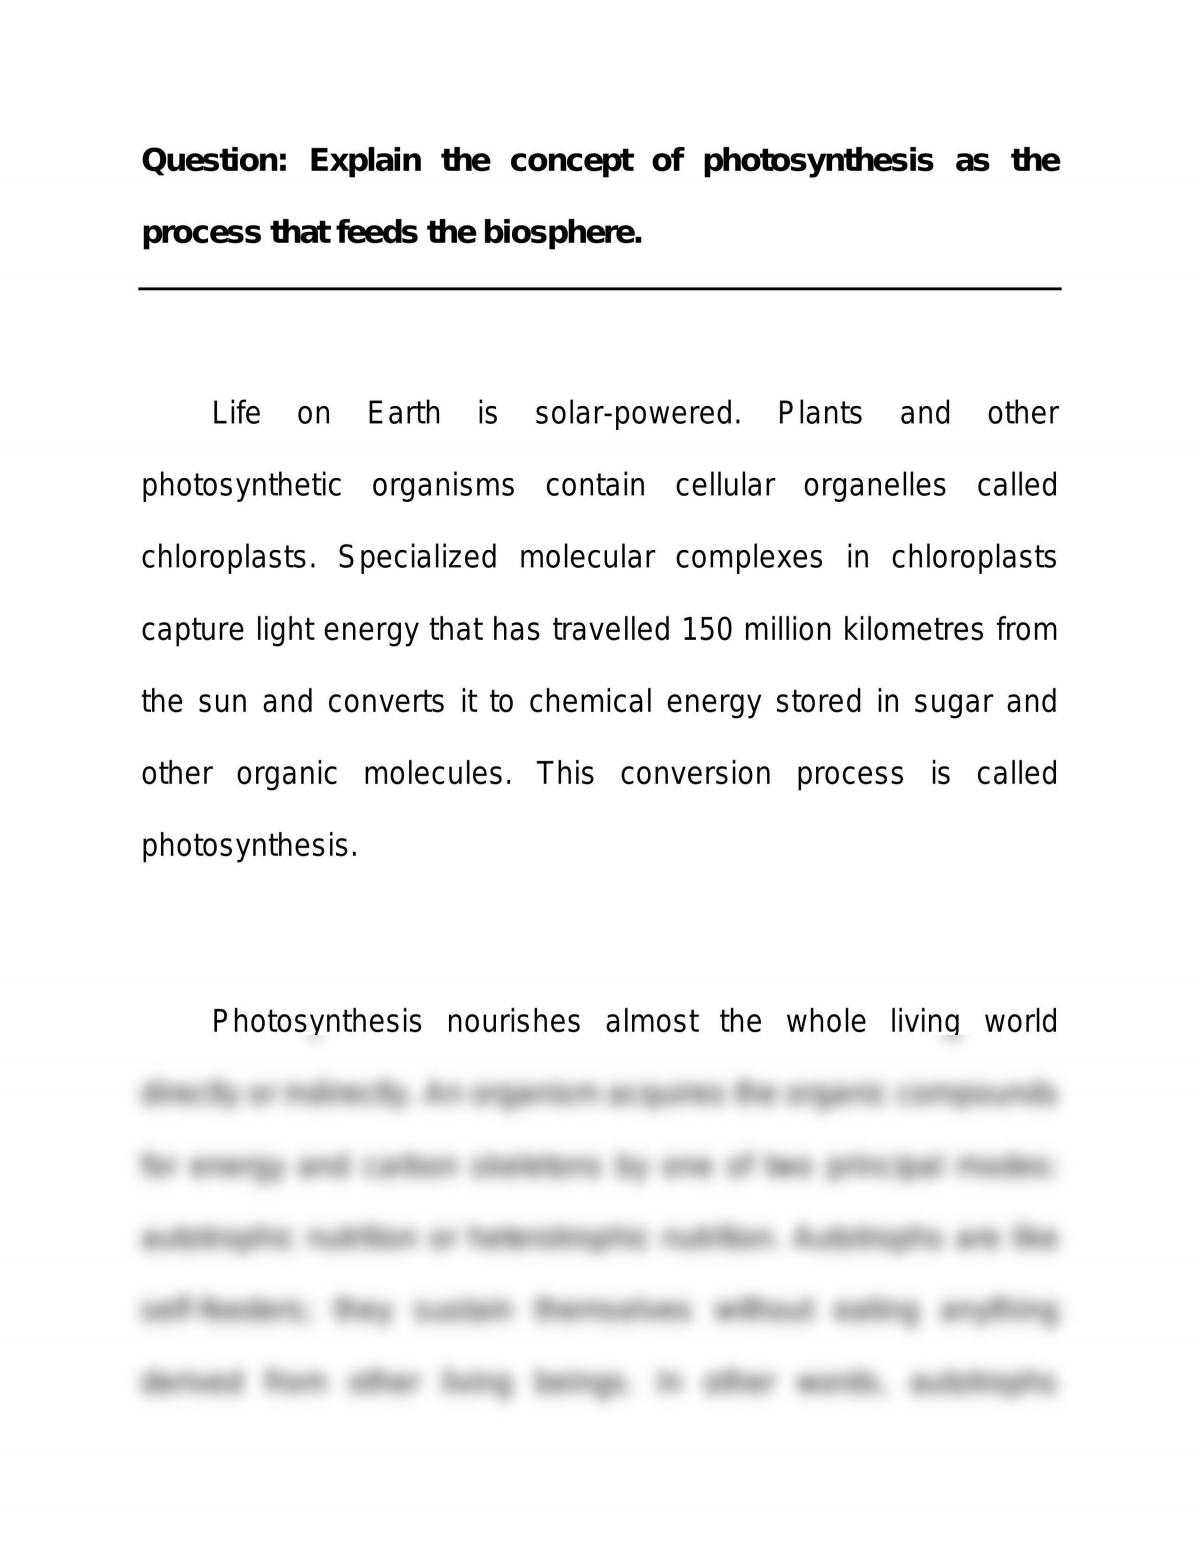 ib biology essay questions photosynthesis